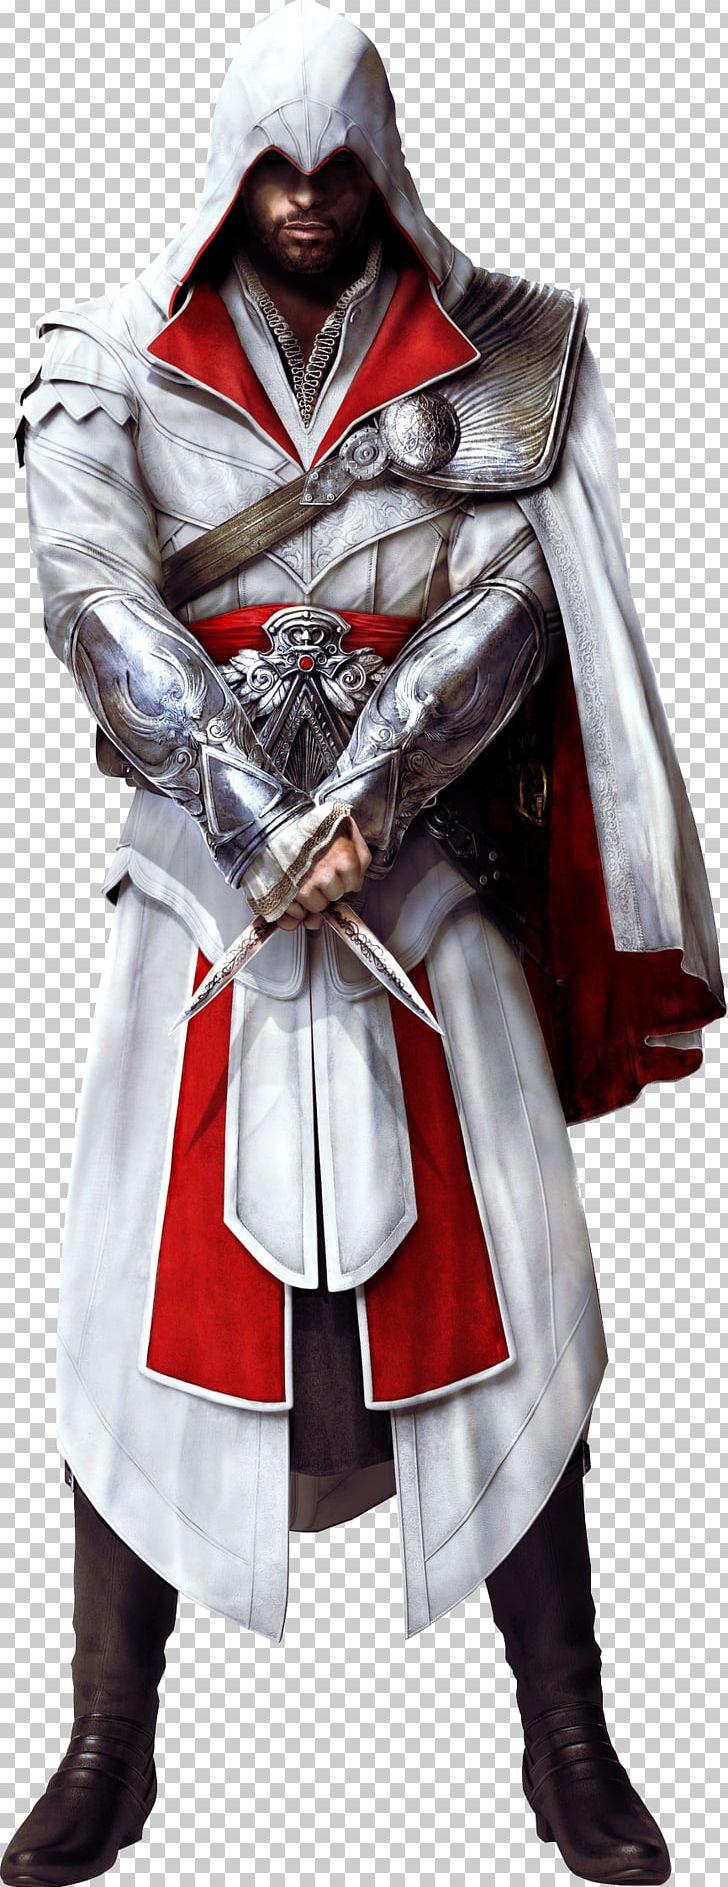 Assassin's Creed: Brotherhood Assassin's Creed II Assassin's Creed: Revelations Assassin's Creed: Ezio Trilogy PNG, Clipart, Ezio, Others, Trilogy Free PNG Download